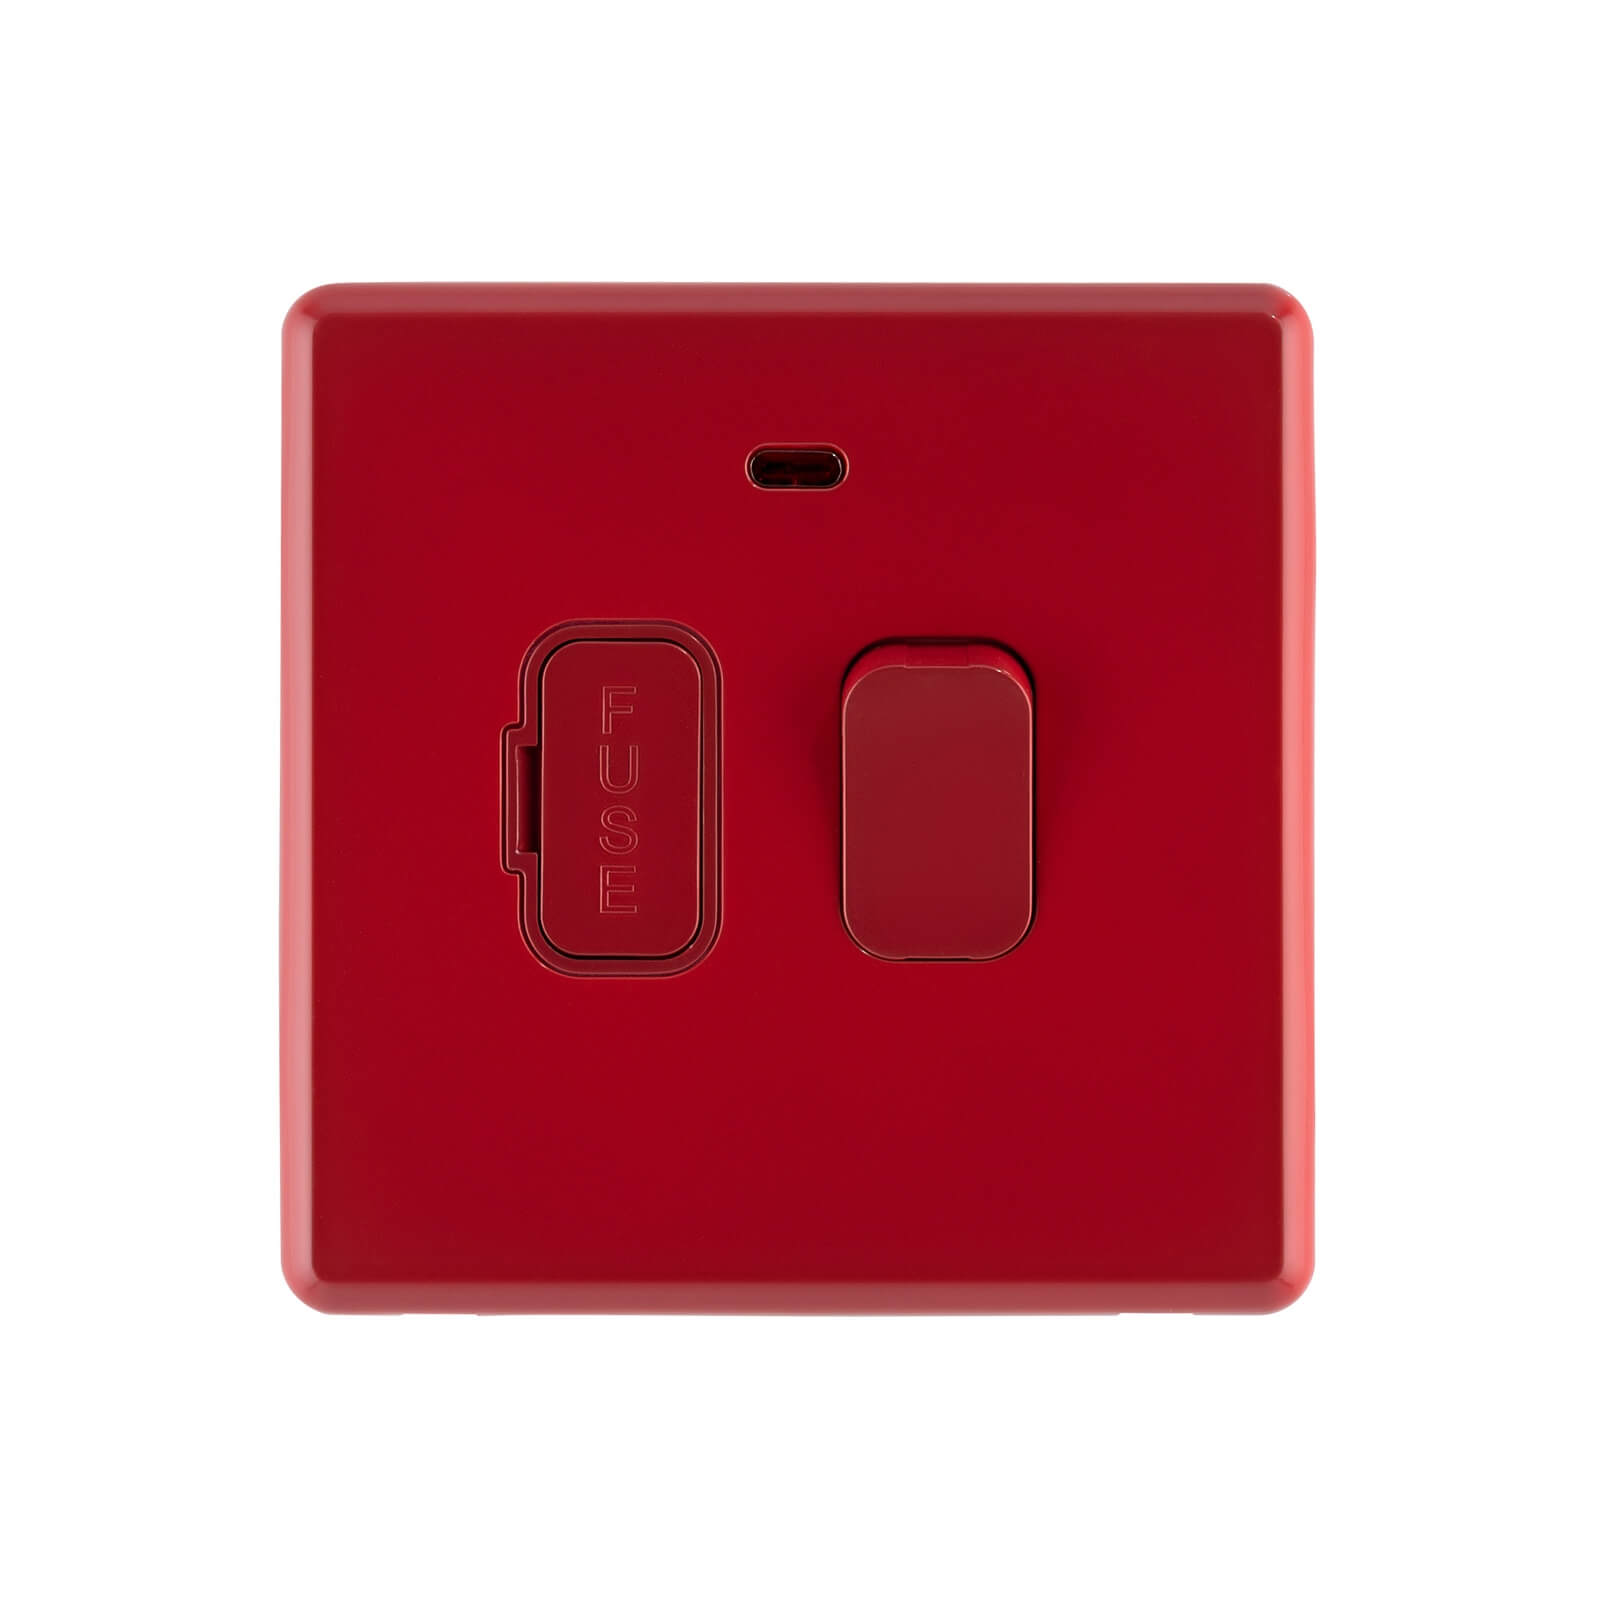 Photo of Arlec Rocker 13a Cherry Red Switched Fused Connection Unit